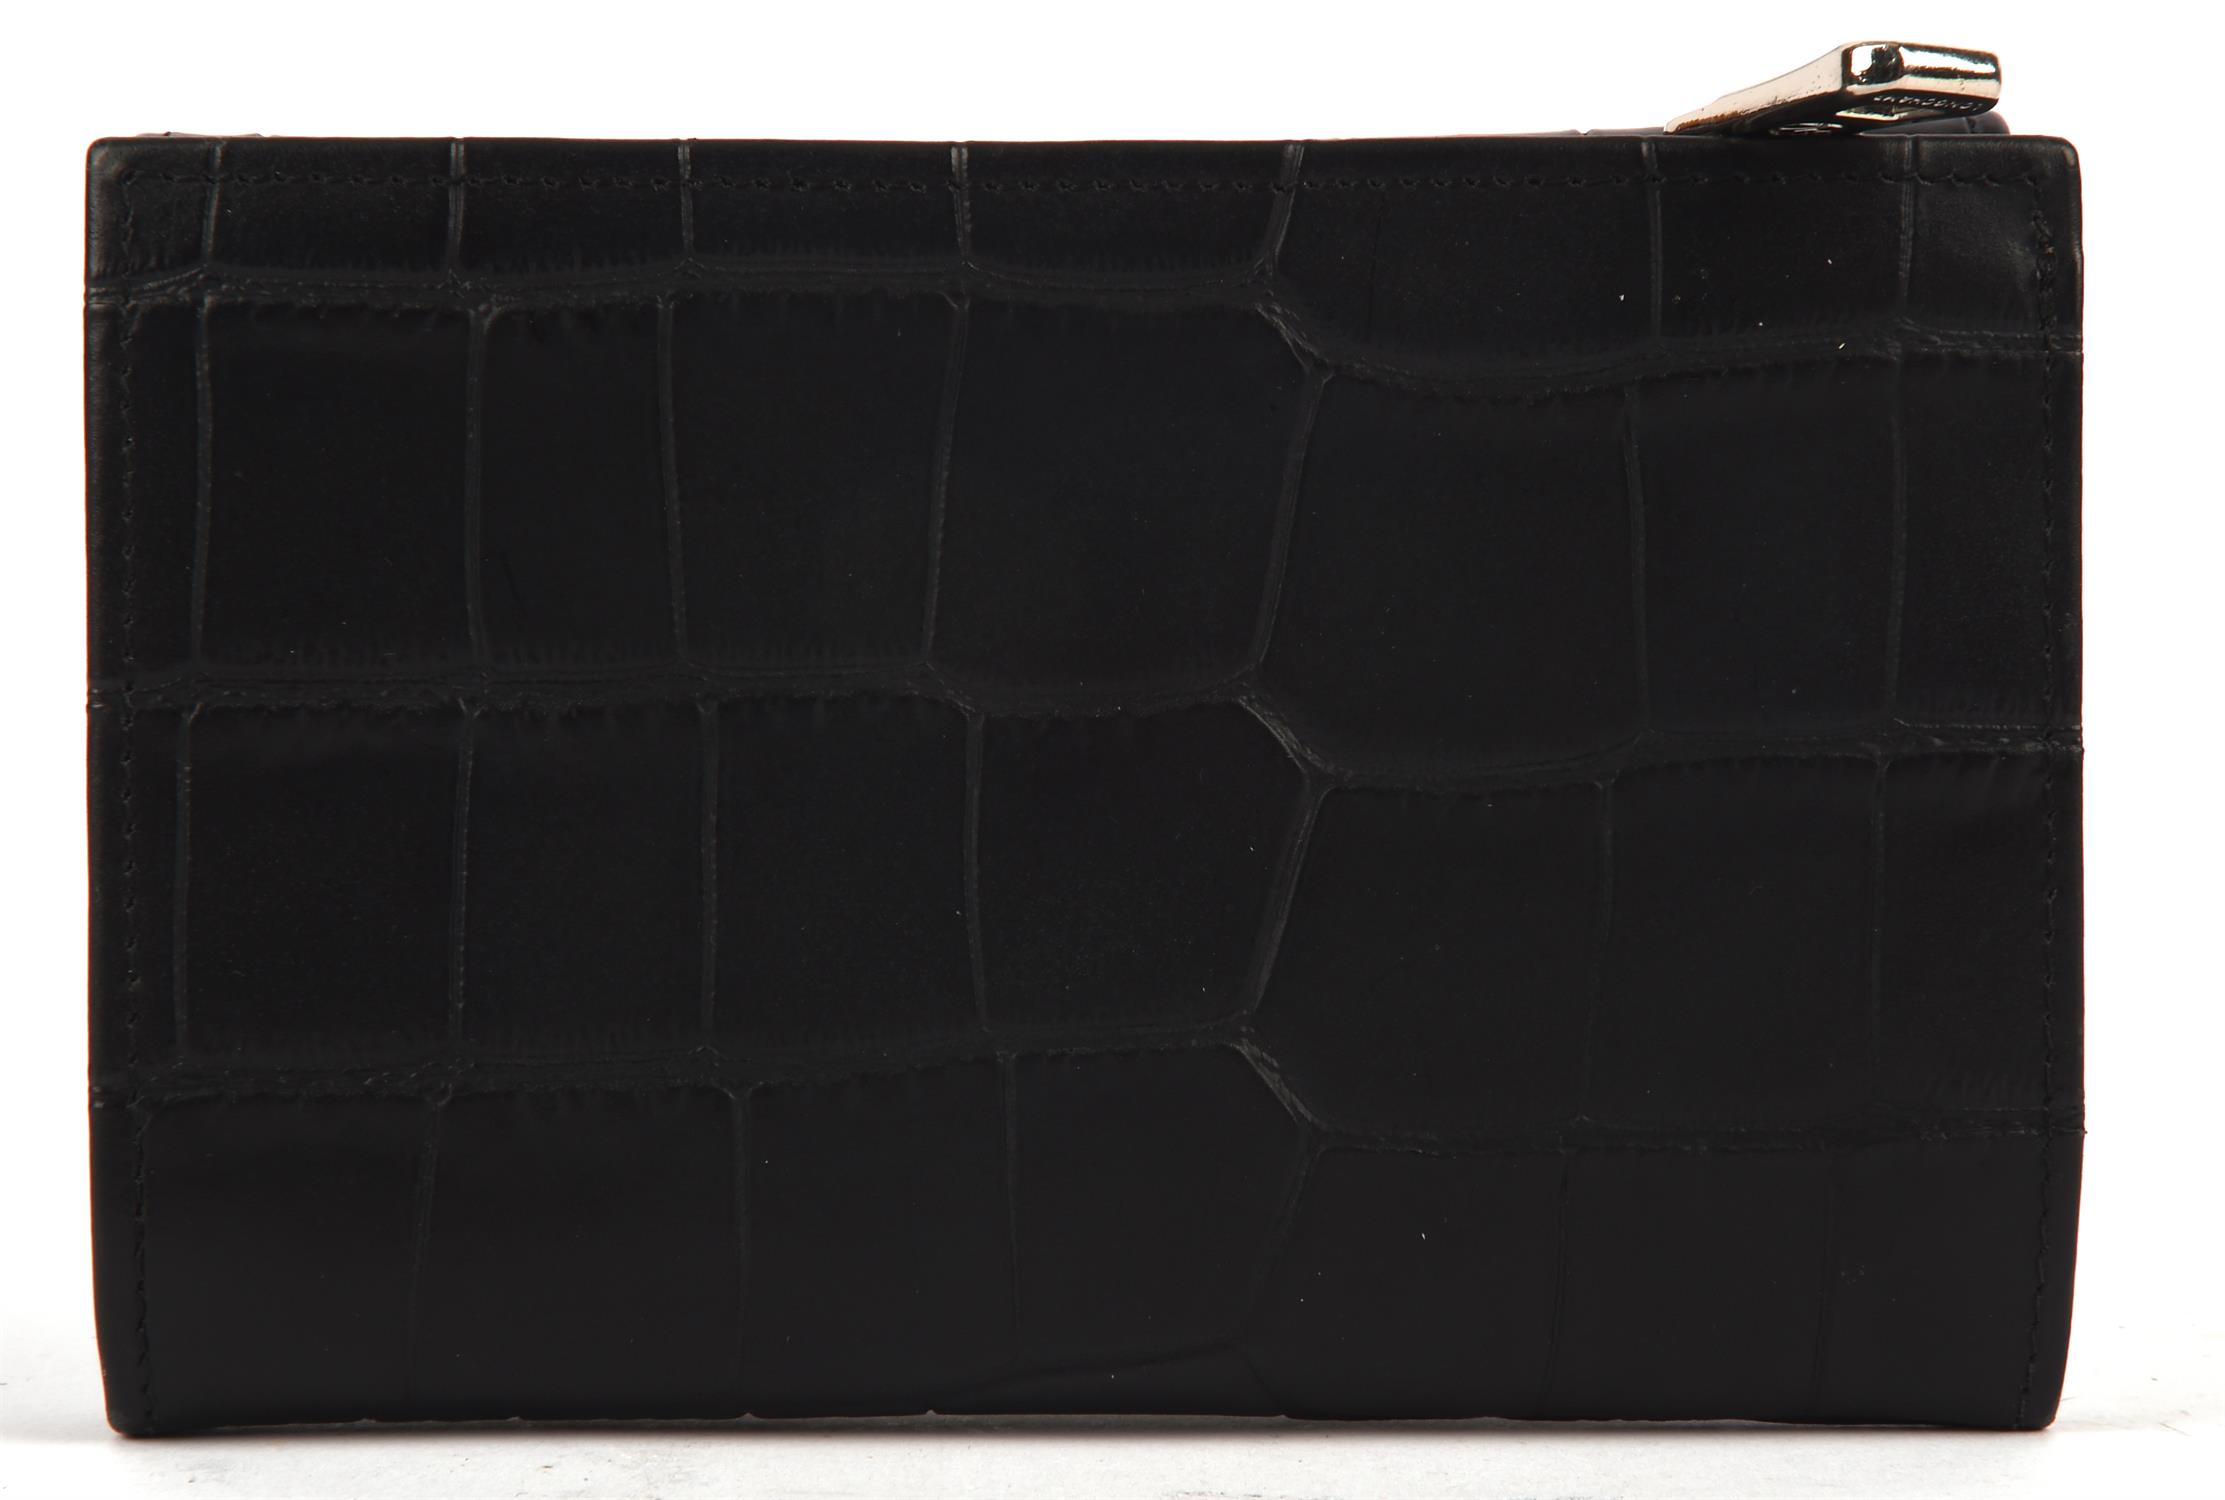 LANGCHAMP unused black croc embossed leather ladies tri-fold purse with silver hardware and - Image 3 of 4